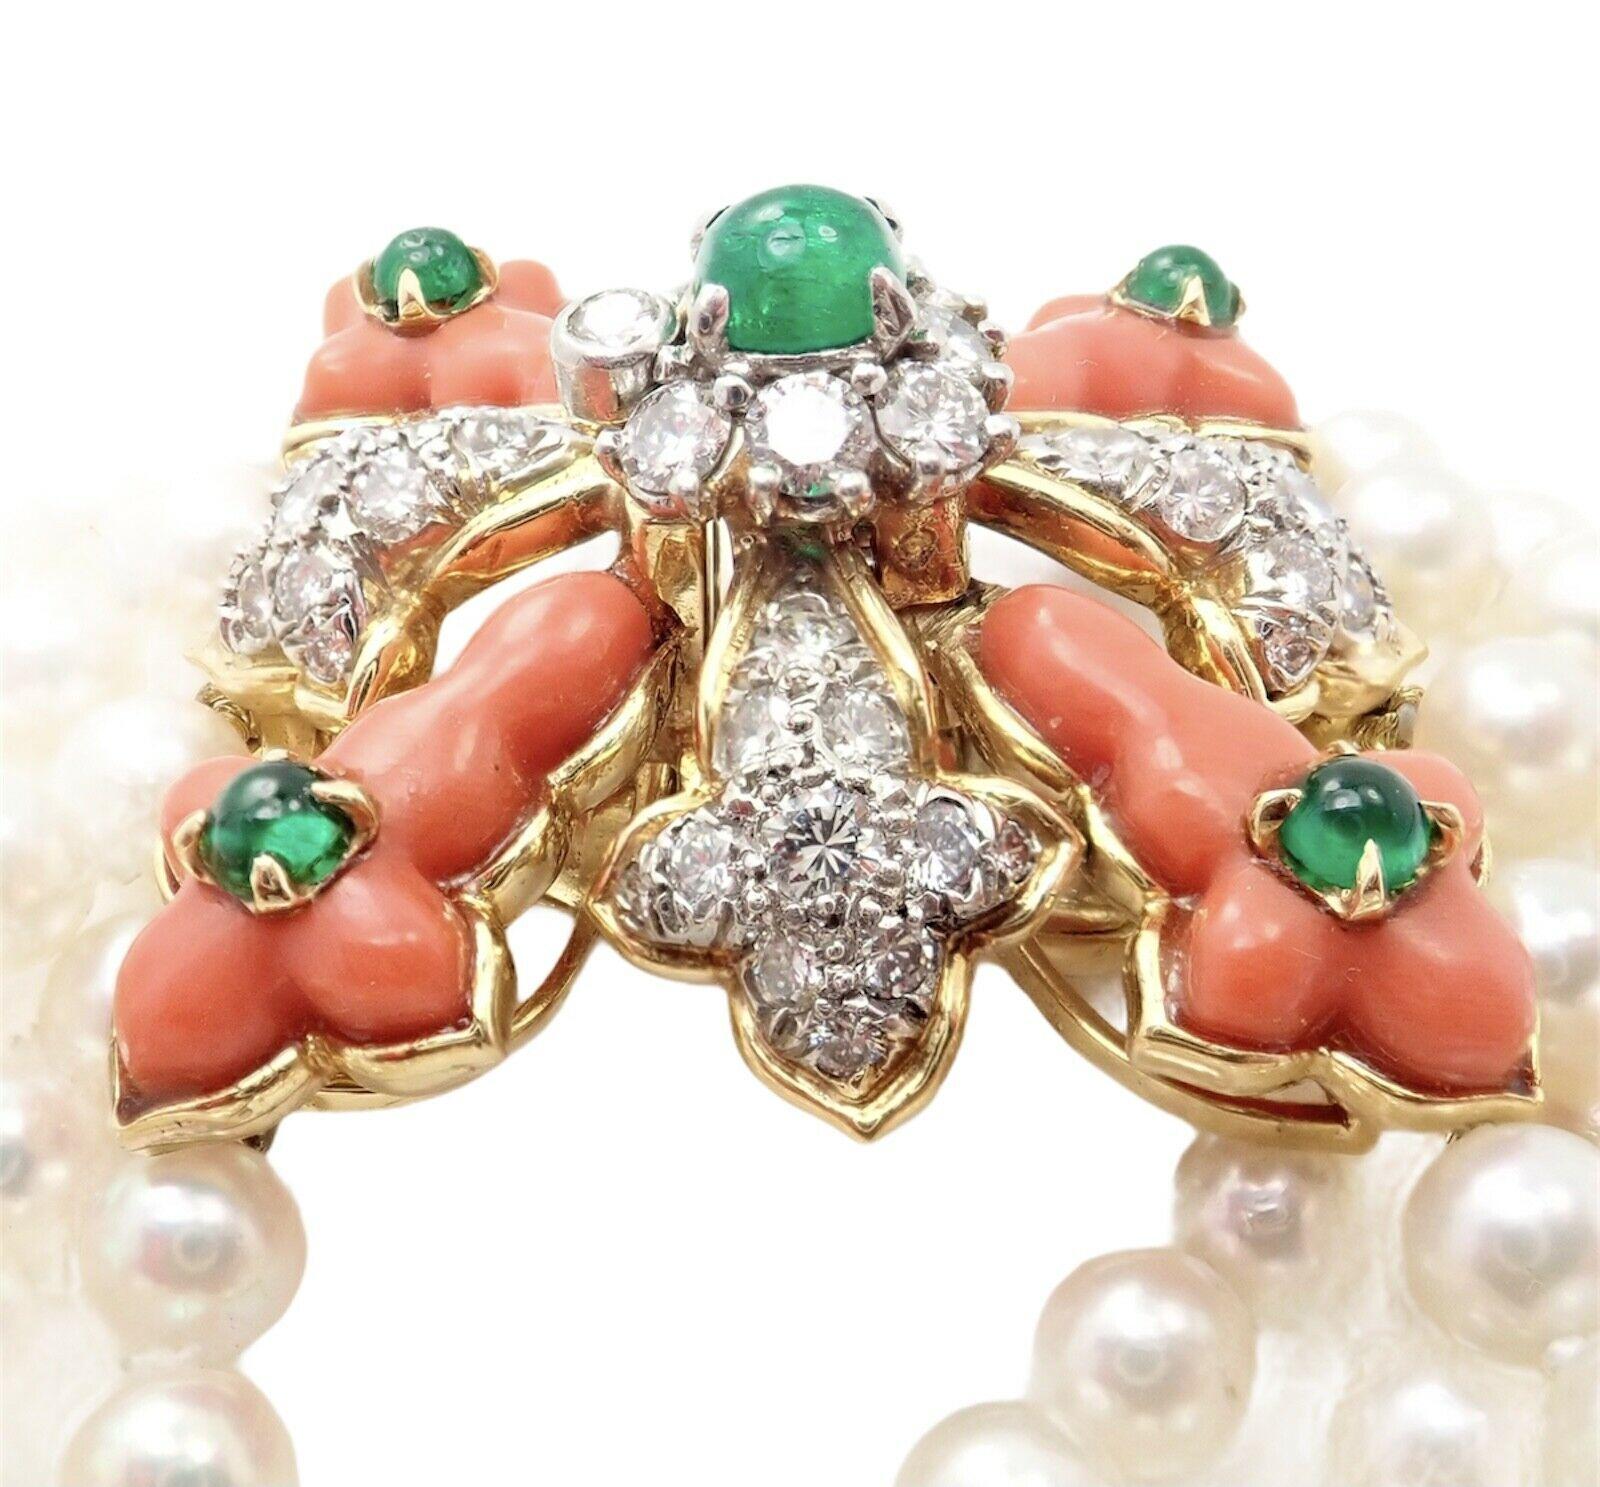 18k Yellow Gold Diamond Coral Emerald Pearl Bracelet by Donald Claflin for Tiffany & Co. 
With 52 Round Brilliant Cut Diamonds, VVS1, E Color
Total Approx Weight 3.00ctw
5 Emeralds Total Approx Weight 3ctw
3 Fancy Cut Corals
Details: 
Weight: 71.1